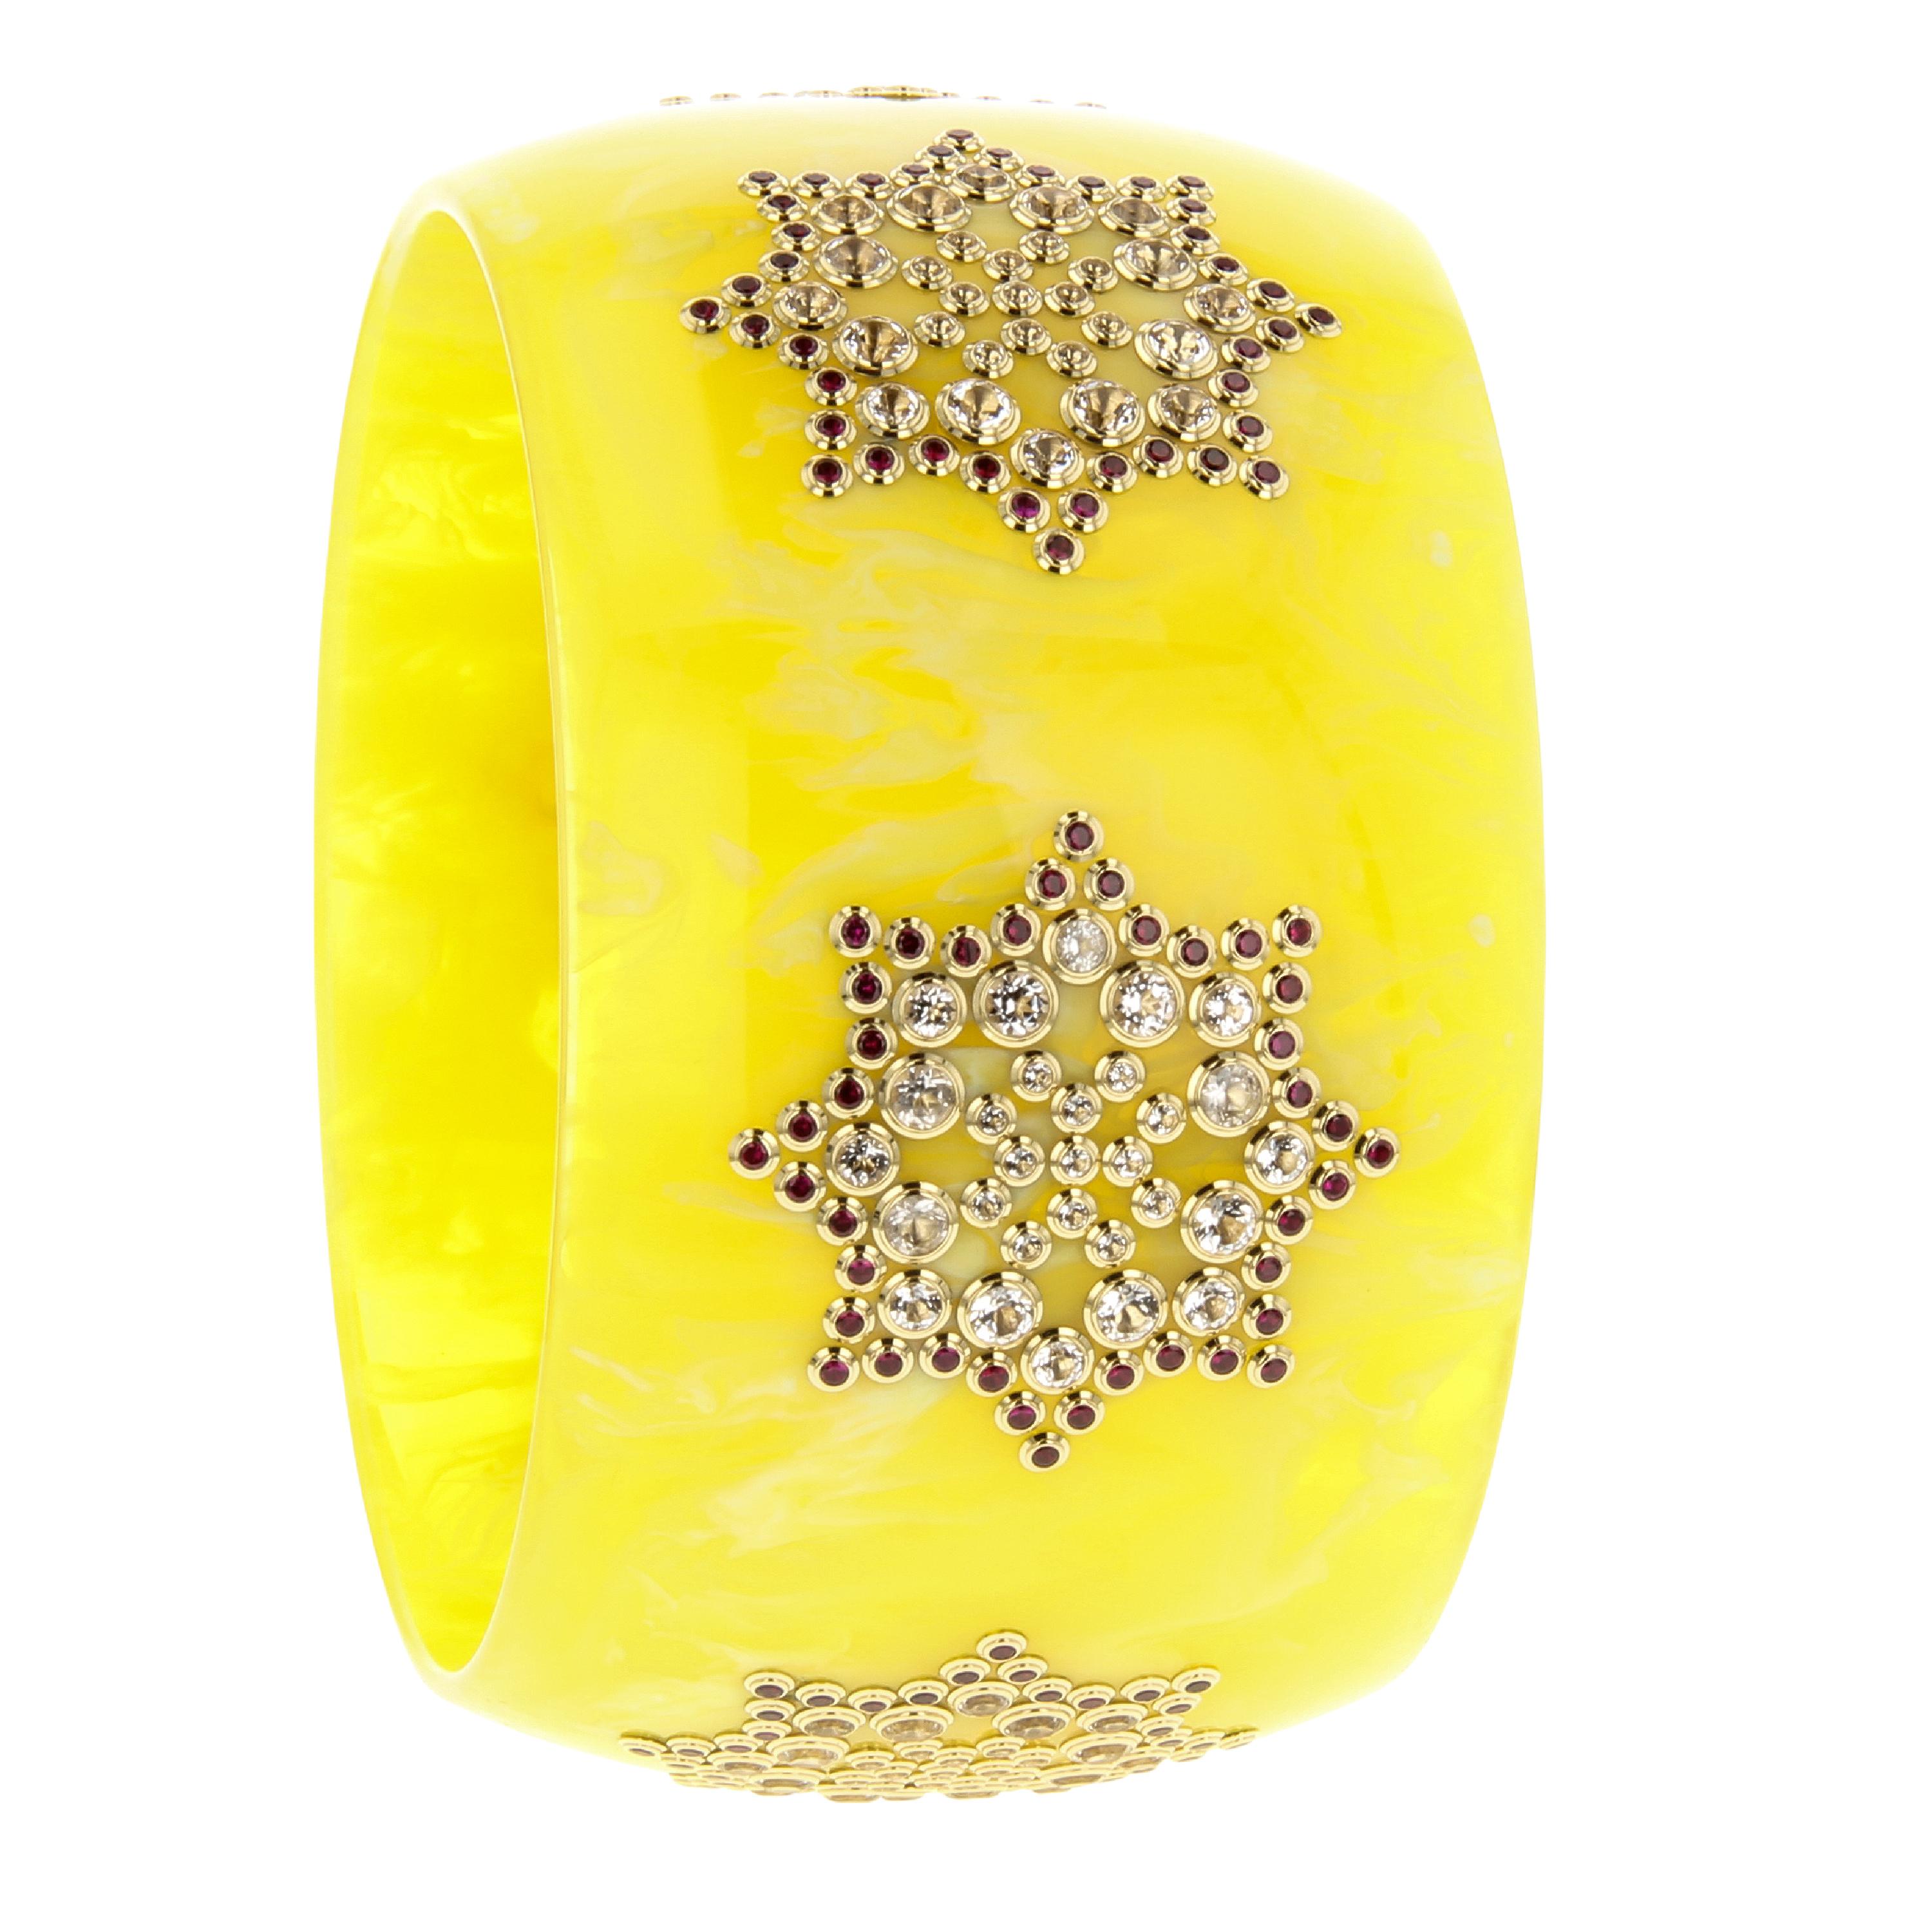 This spectacular Mark Davis bangle of brilliant, yellow, vintage bakelite has been set with a complex geometric motif of fine, perfectly matched rubies and sparkling white topaz. One-of-a-kind and very special.

Full details below:
• From the Mark